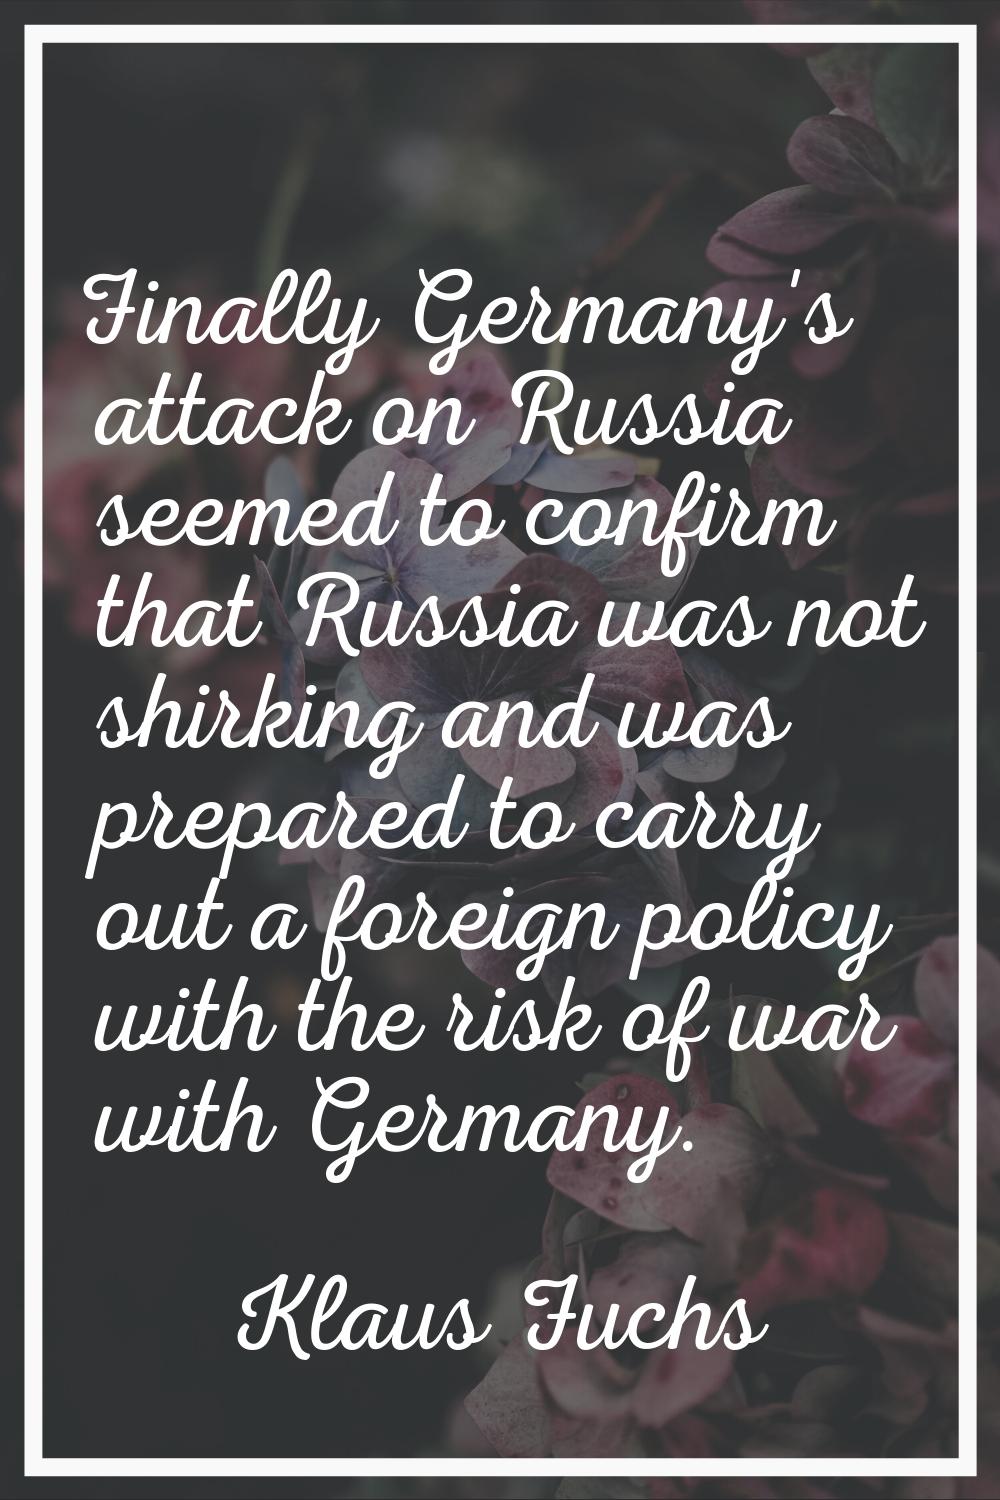 Finally Germany's attack on Russia seemed to confirm that Russia was not shirking and was prepared 